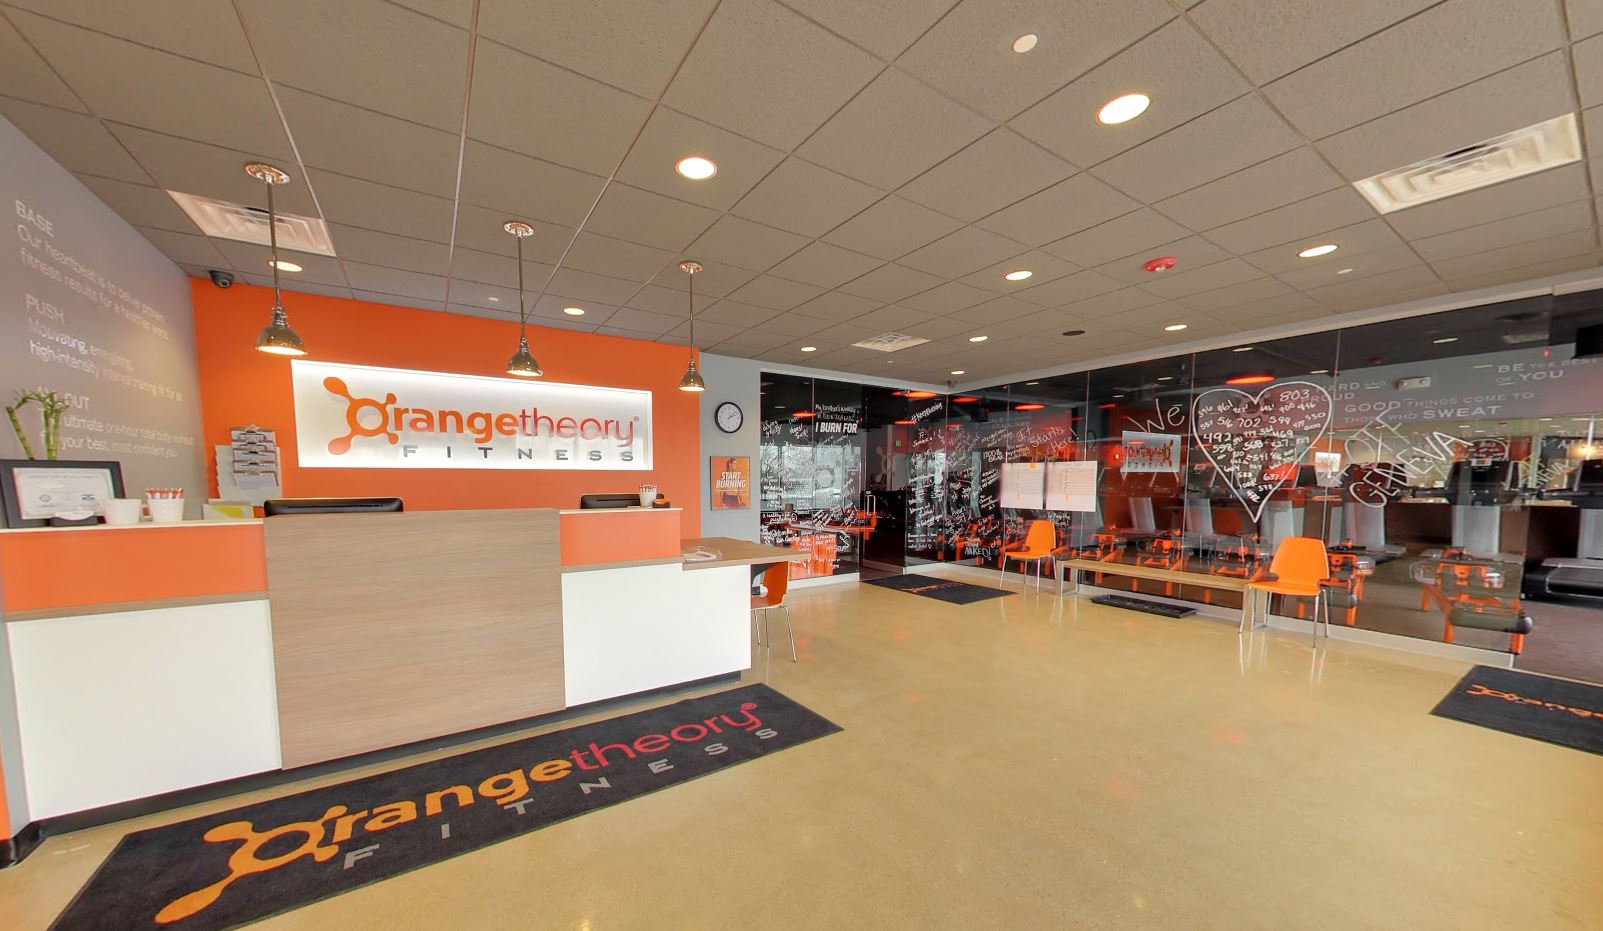 Team Kling' Brings New Orangetheory Fitness Location to the West Suburbs -  Metro Commercial Real Estate